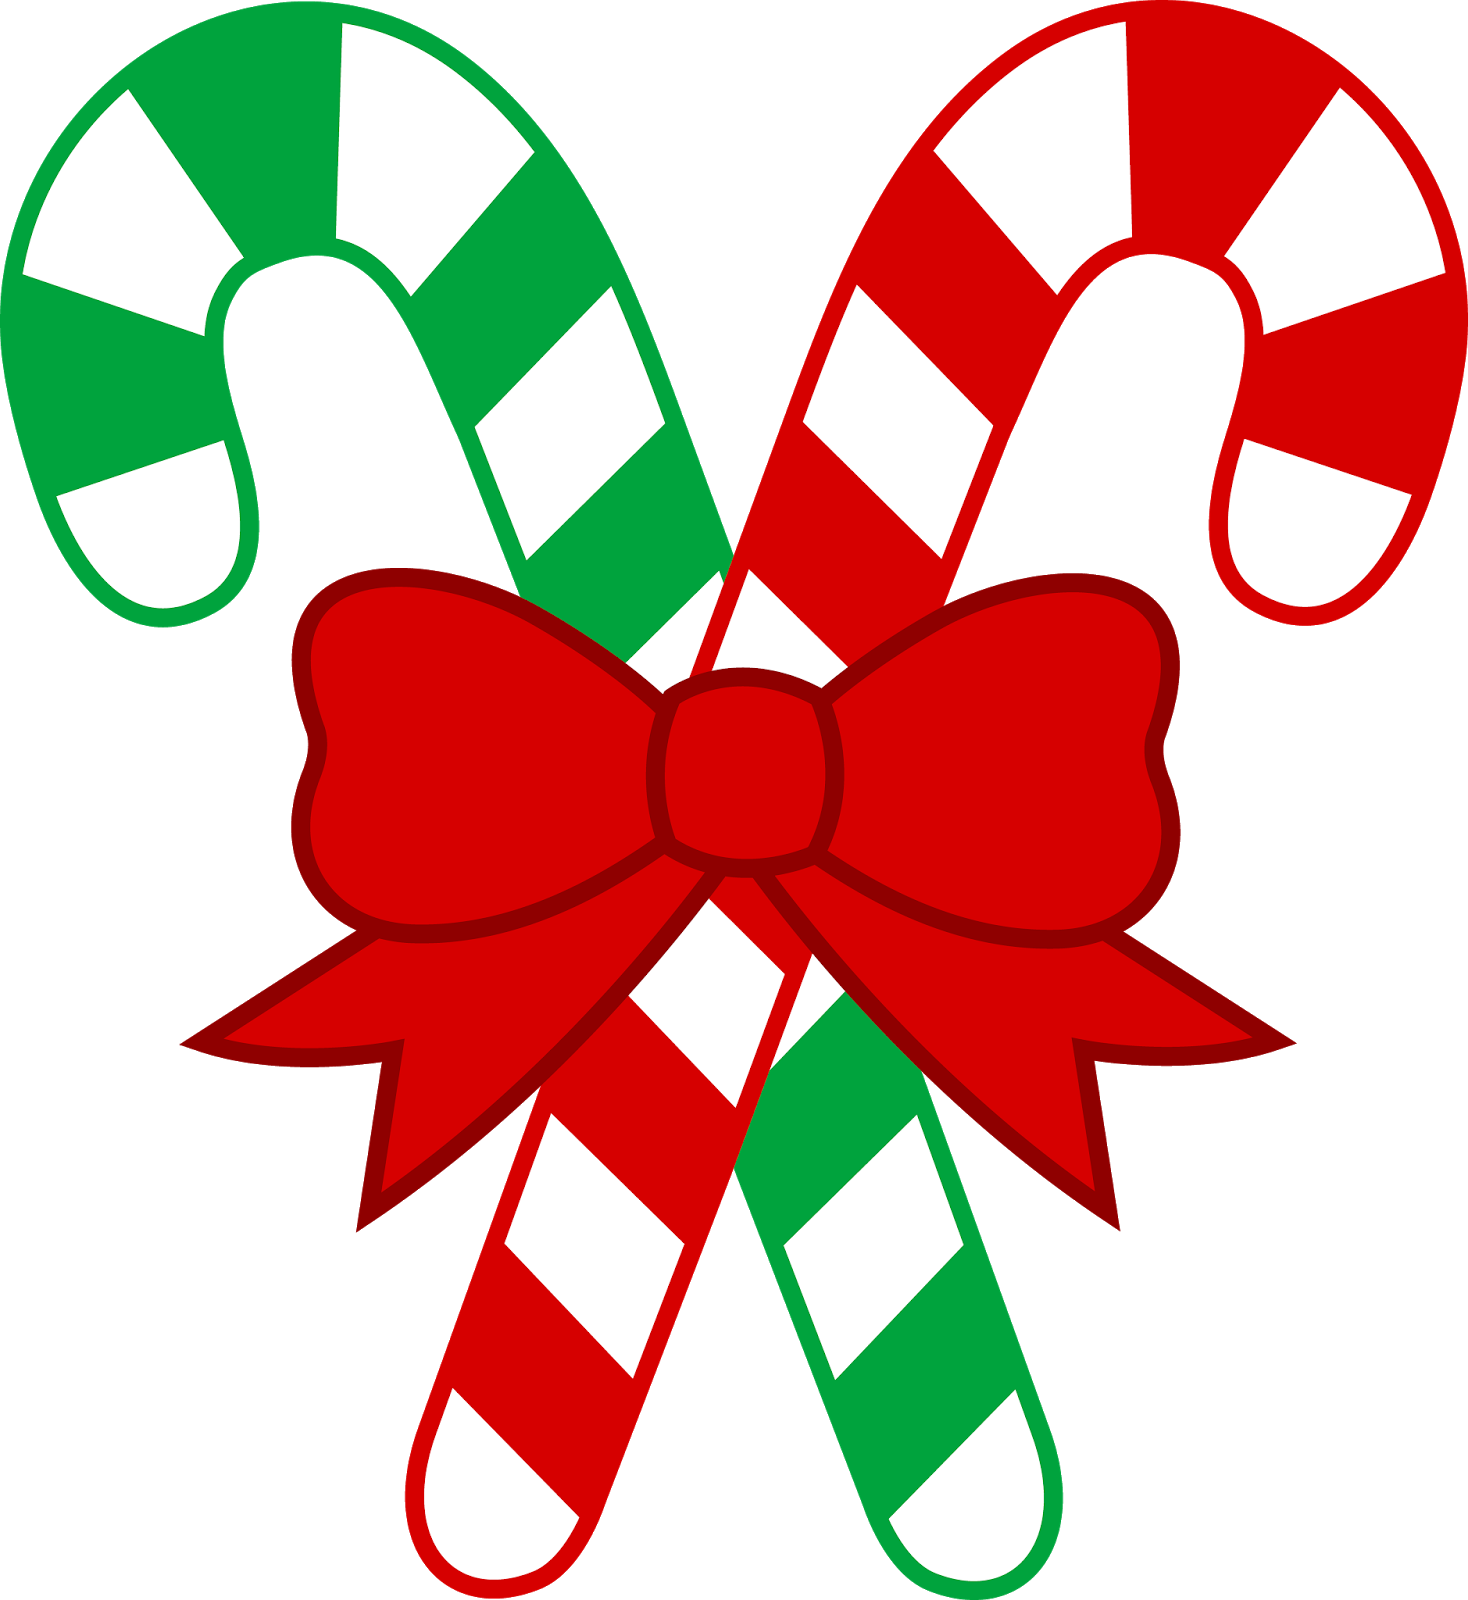 Free Christmas Design Cliparts, Download Free Clip Art, Free.